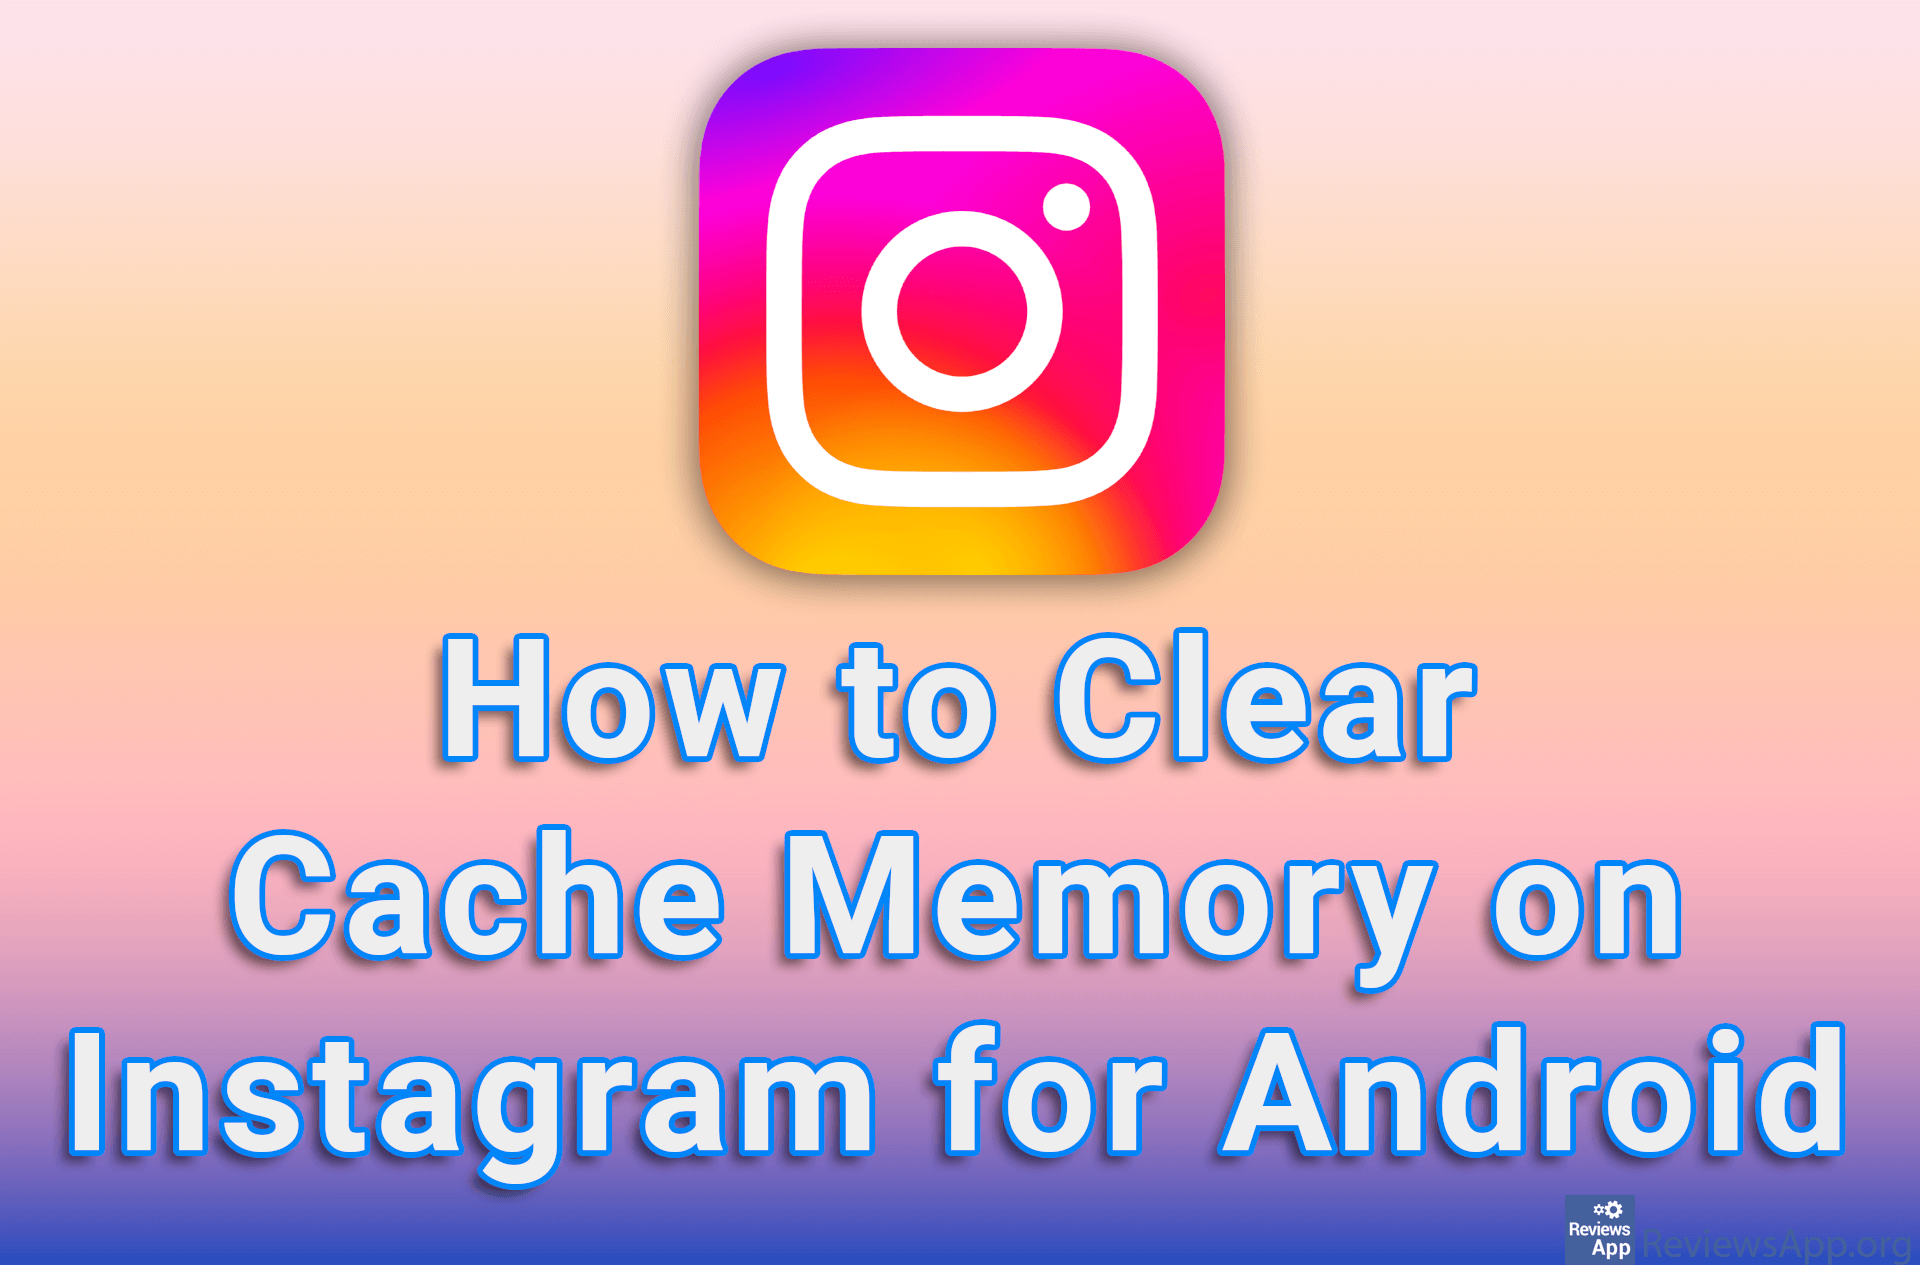 How to Clear Cache Memory on Instagram for Android